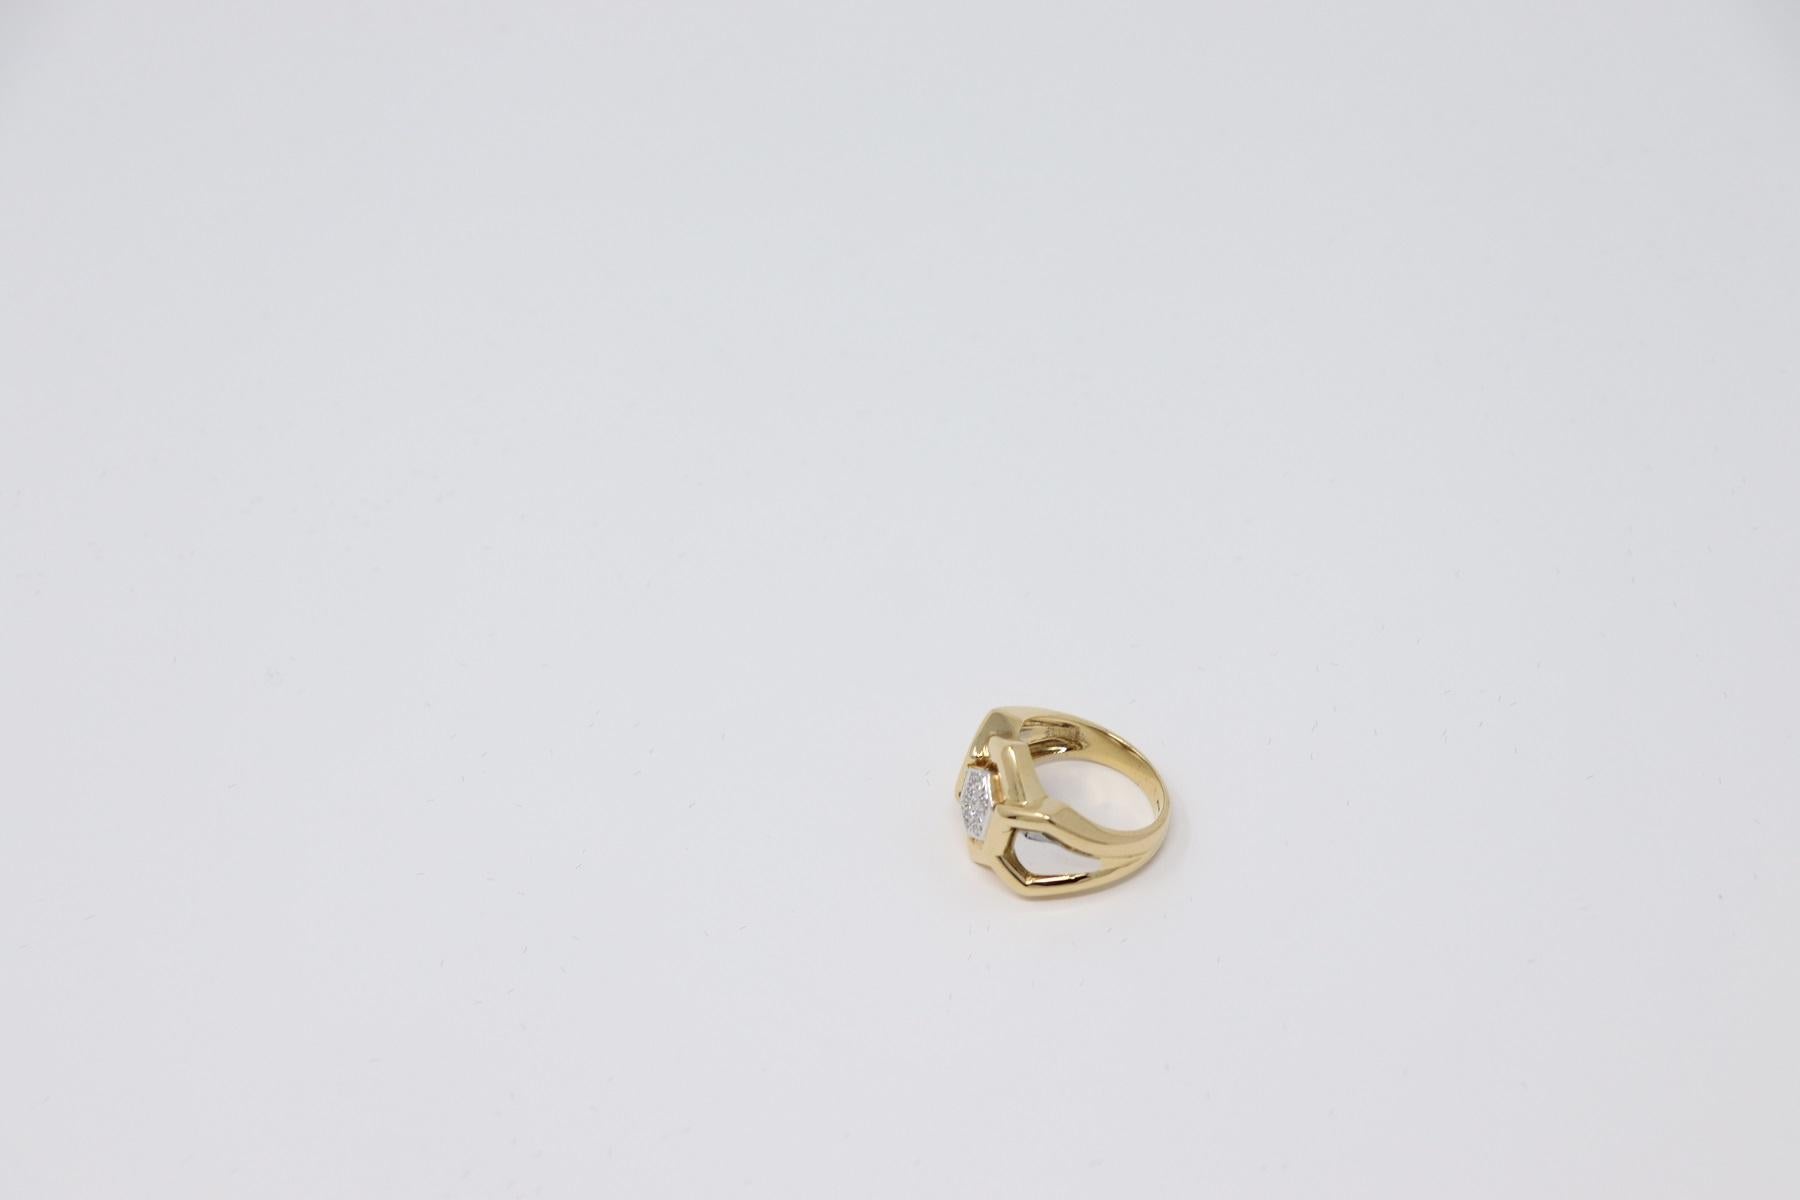 Women's Gold and 0.12 Carat Diamonds Signert Ring by Gianni Carità For Sale